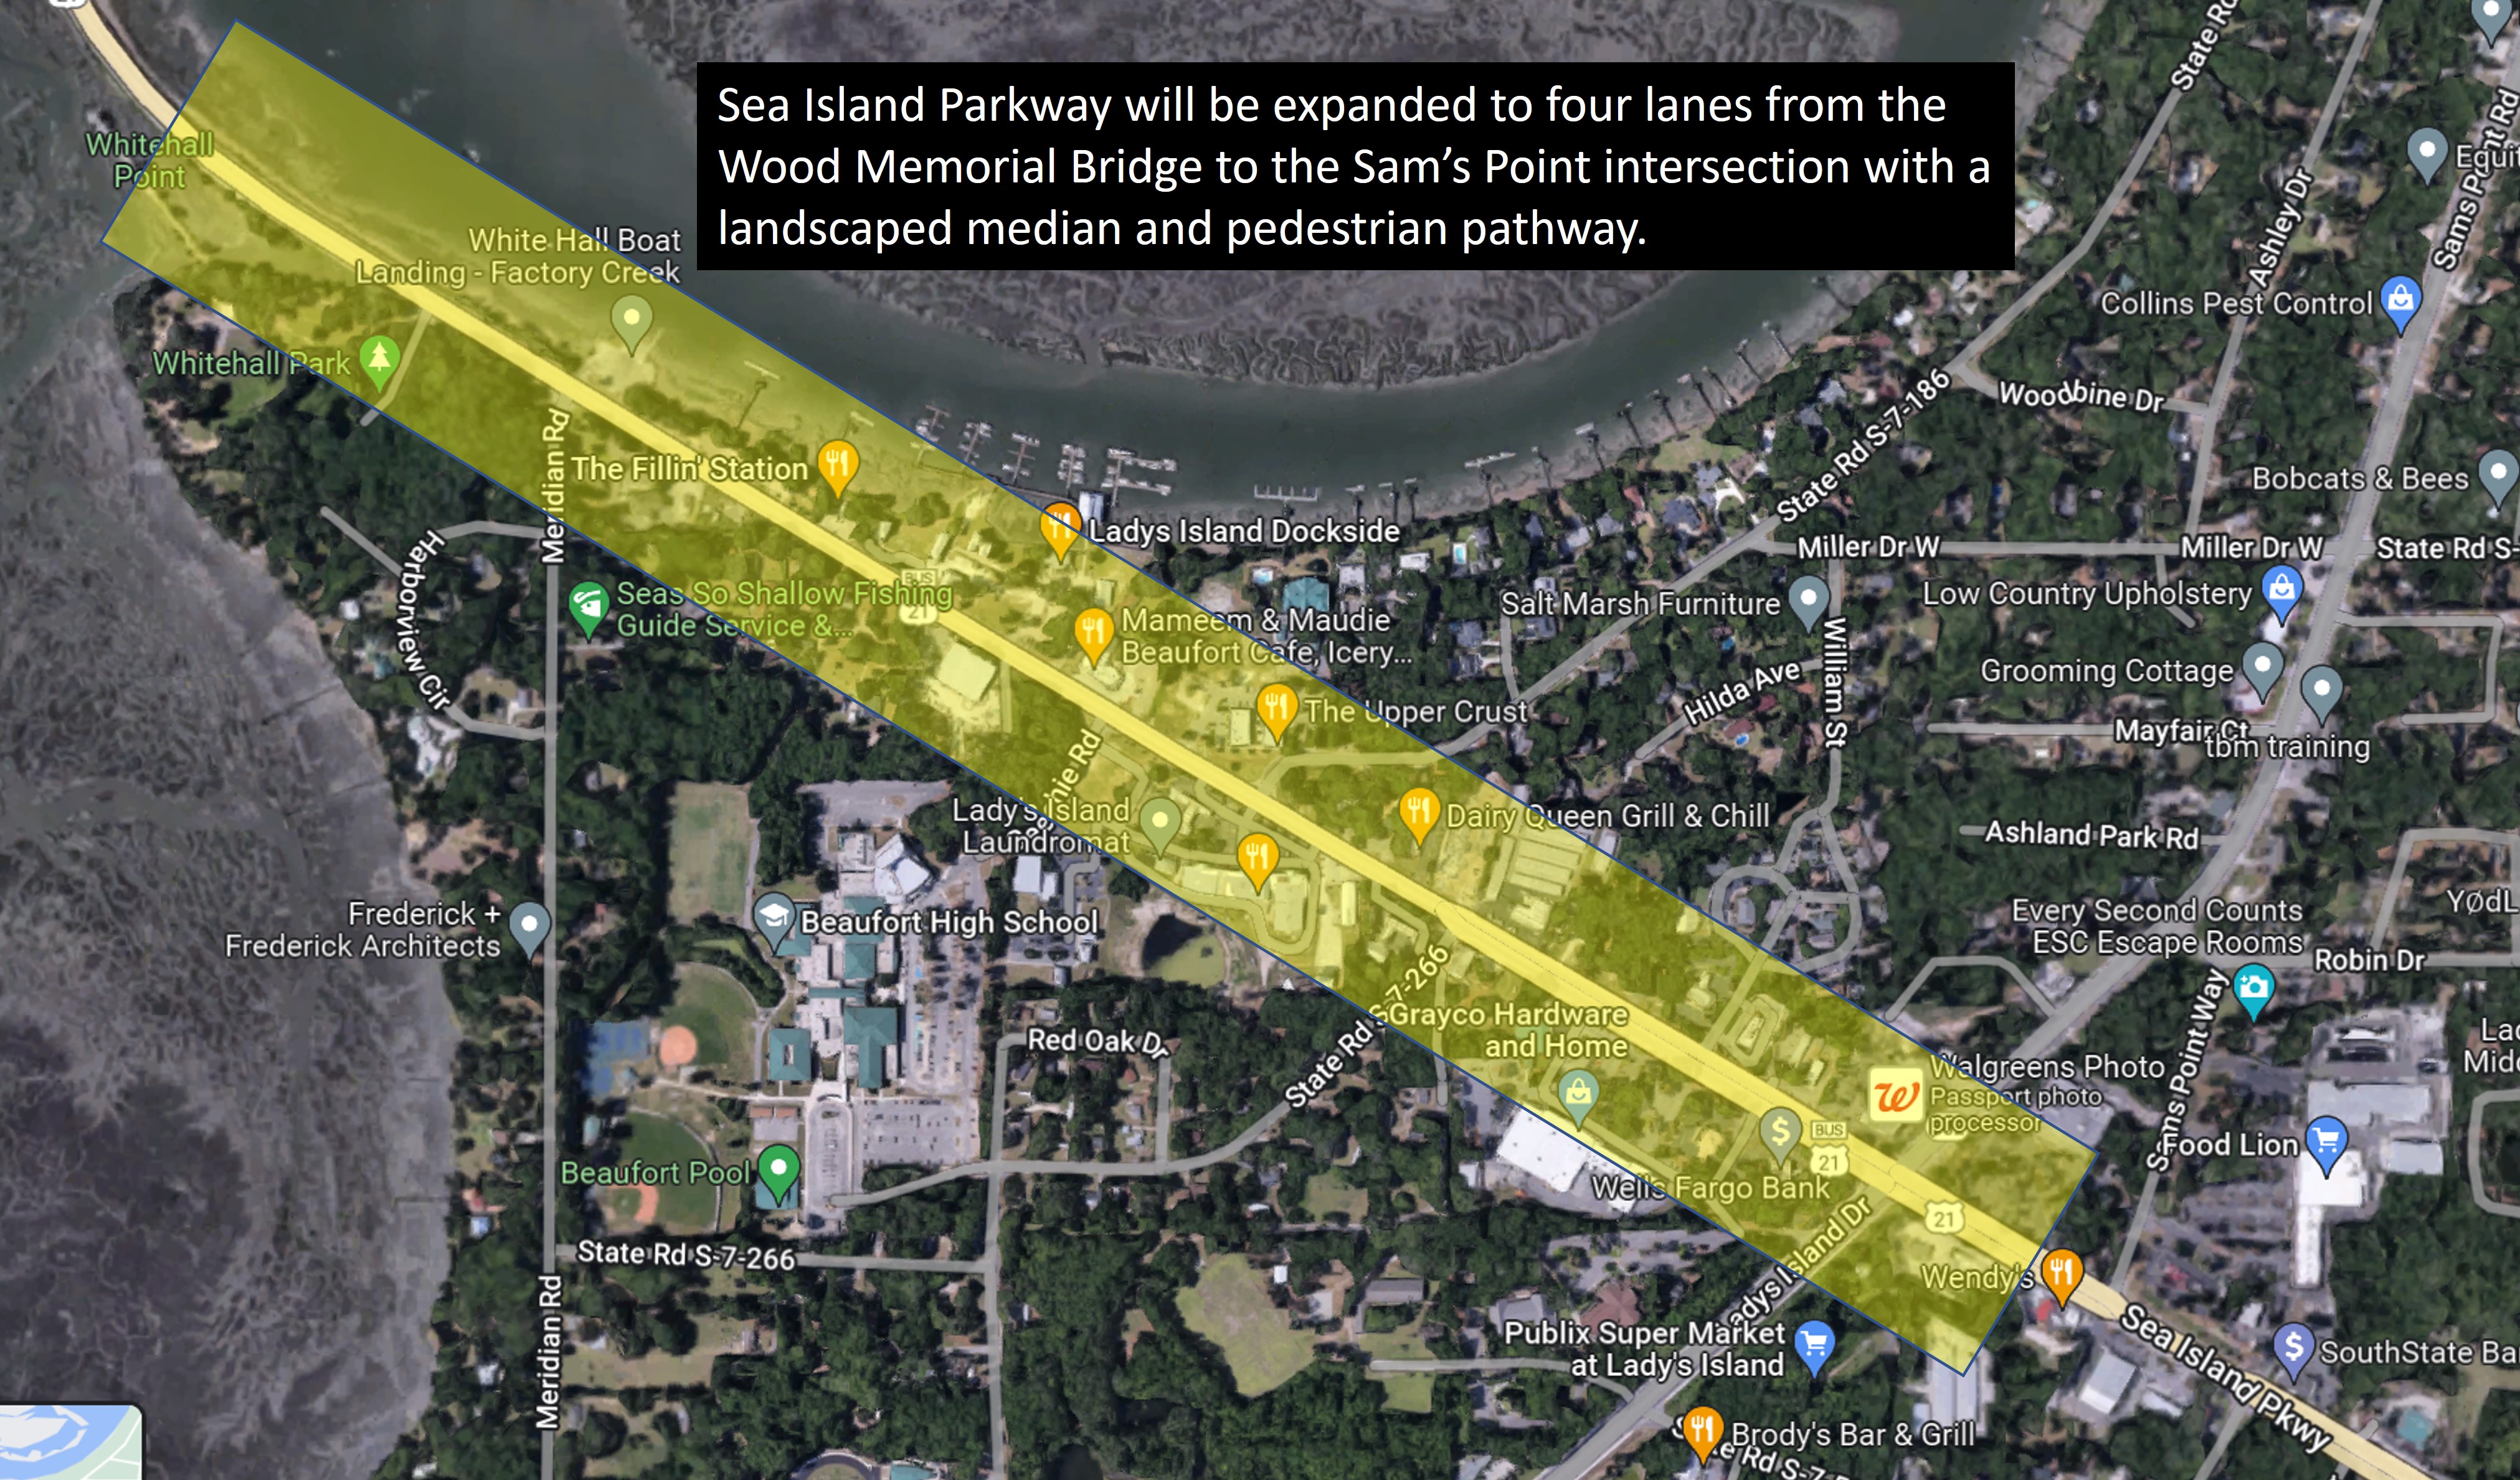 Public Facilities Committee Votes to Expand Sea Island Parkway to Four Lanes With a Landscaped Median 